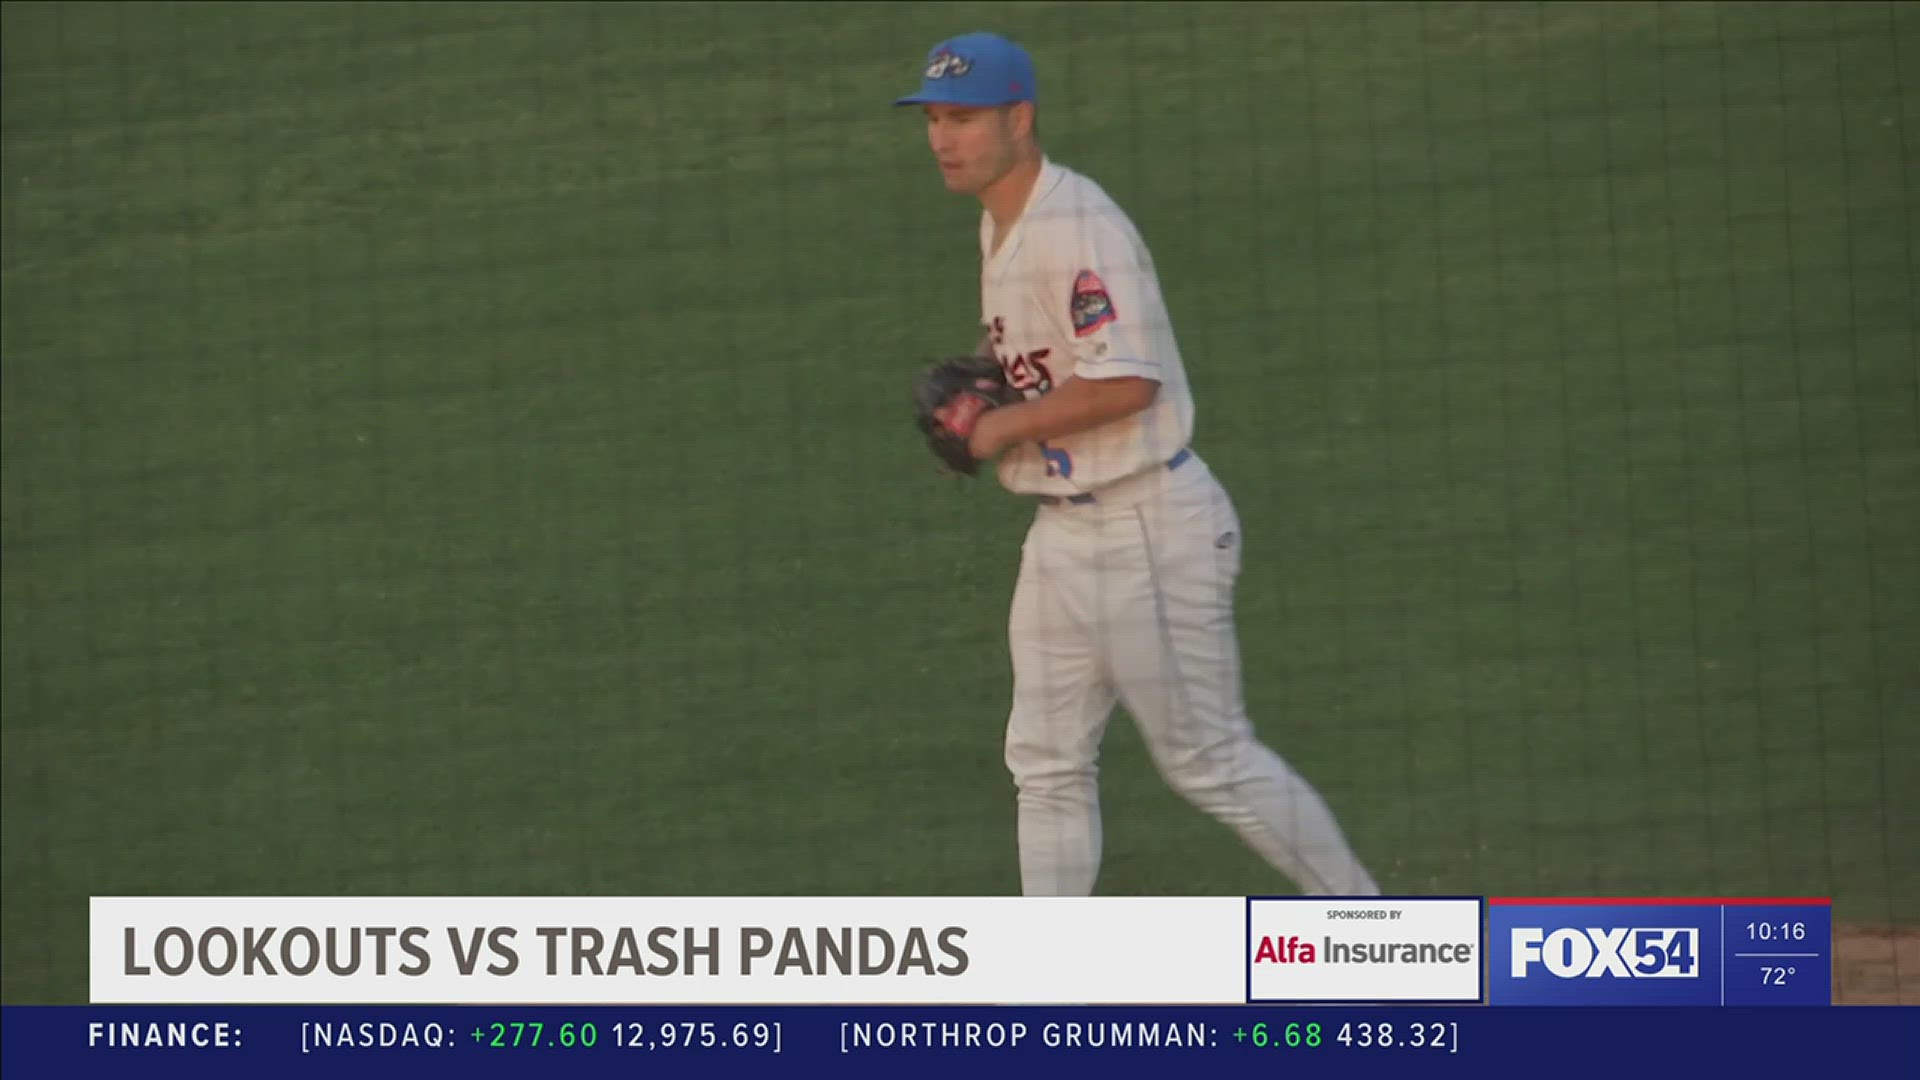 Trash Pandas next in action Sunday at Toyota Field. First pitch set for 6:35 p.m.